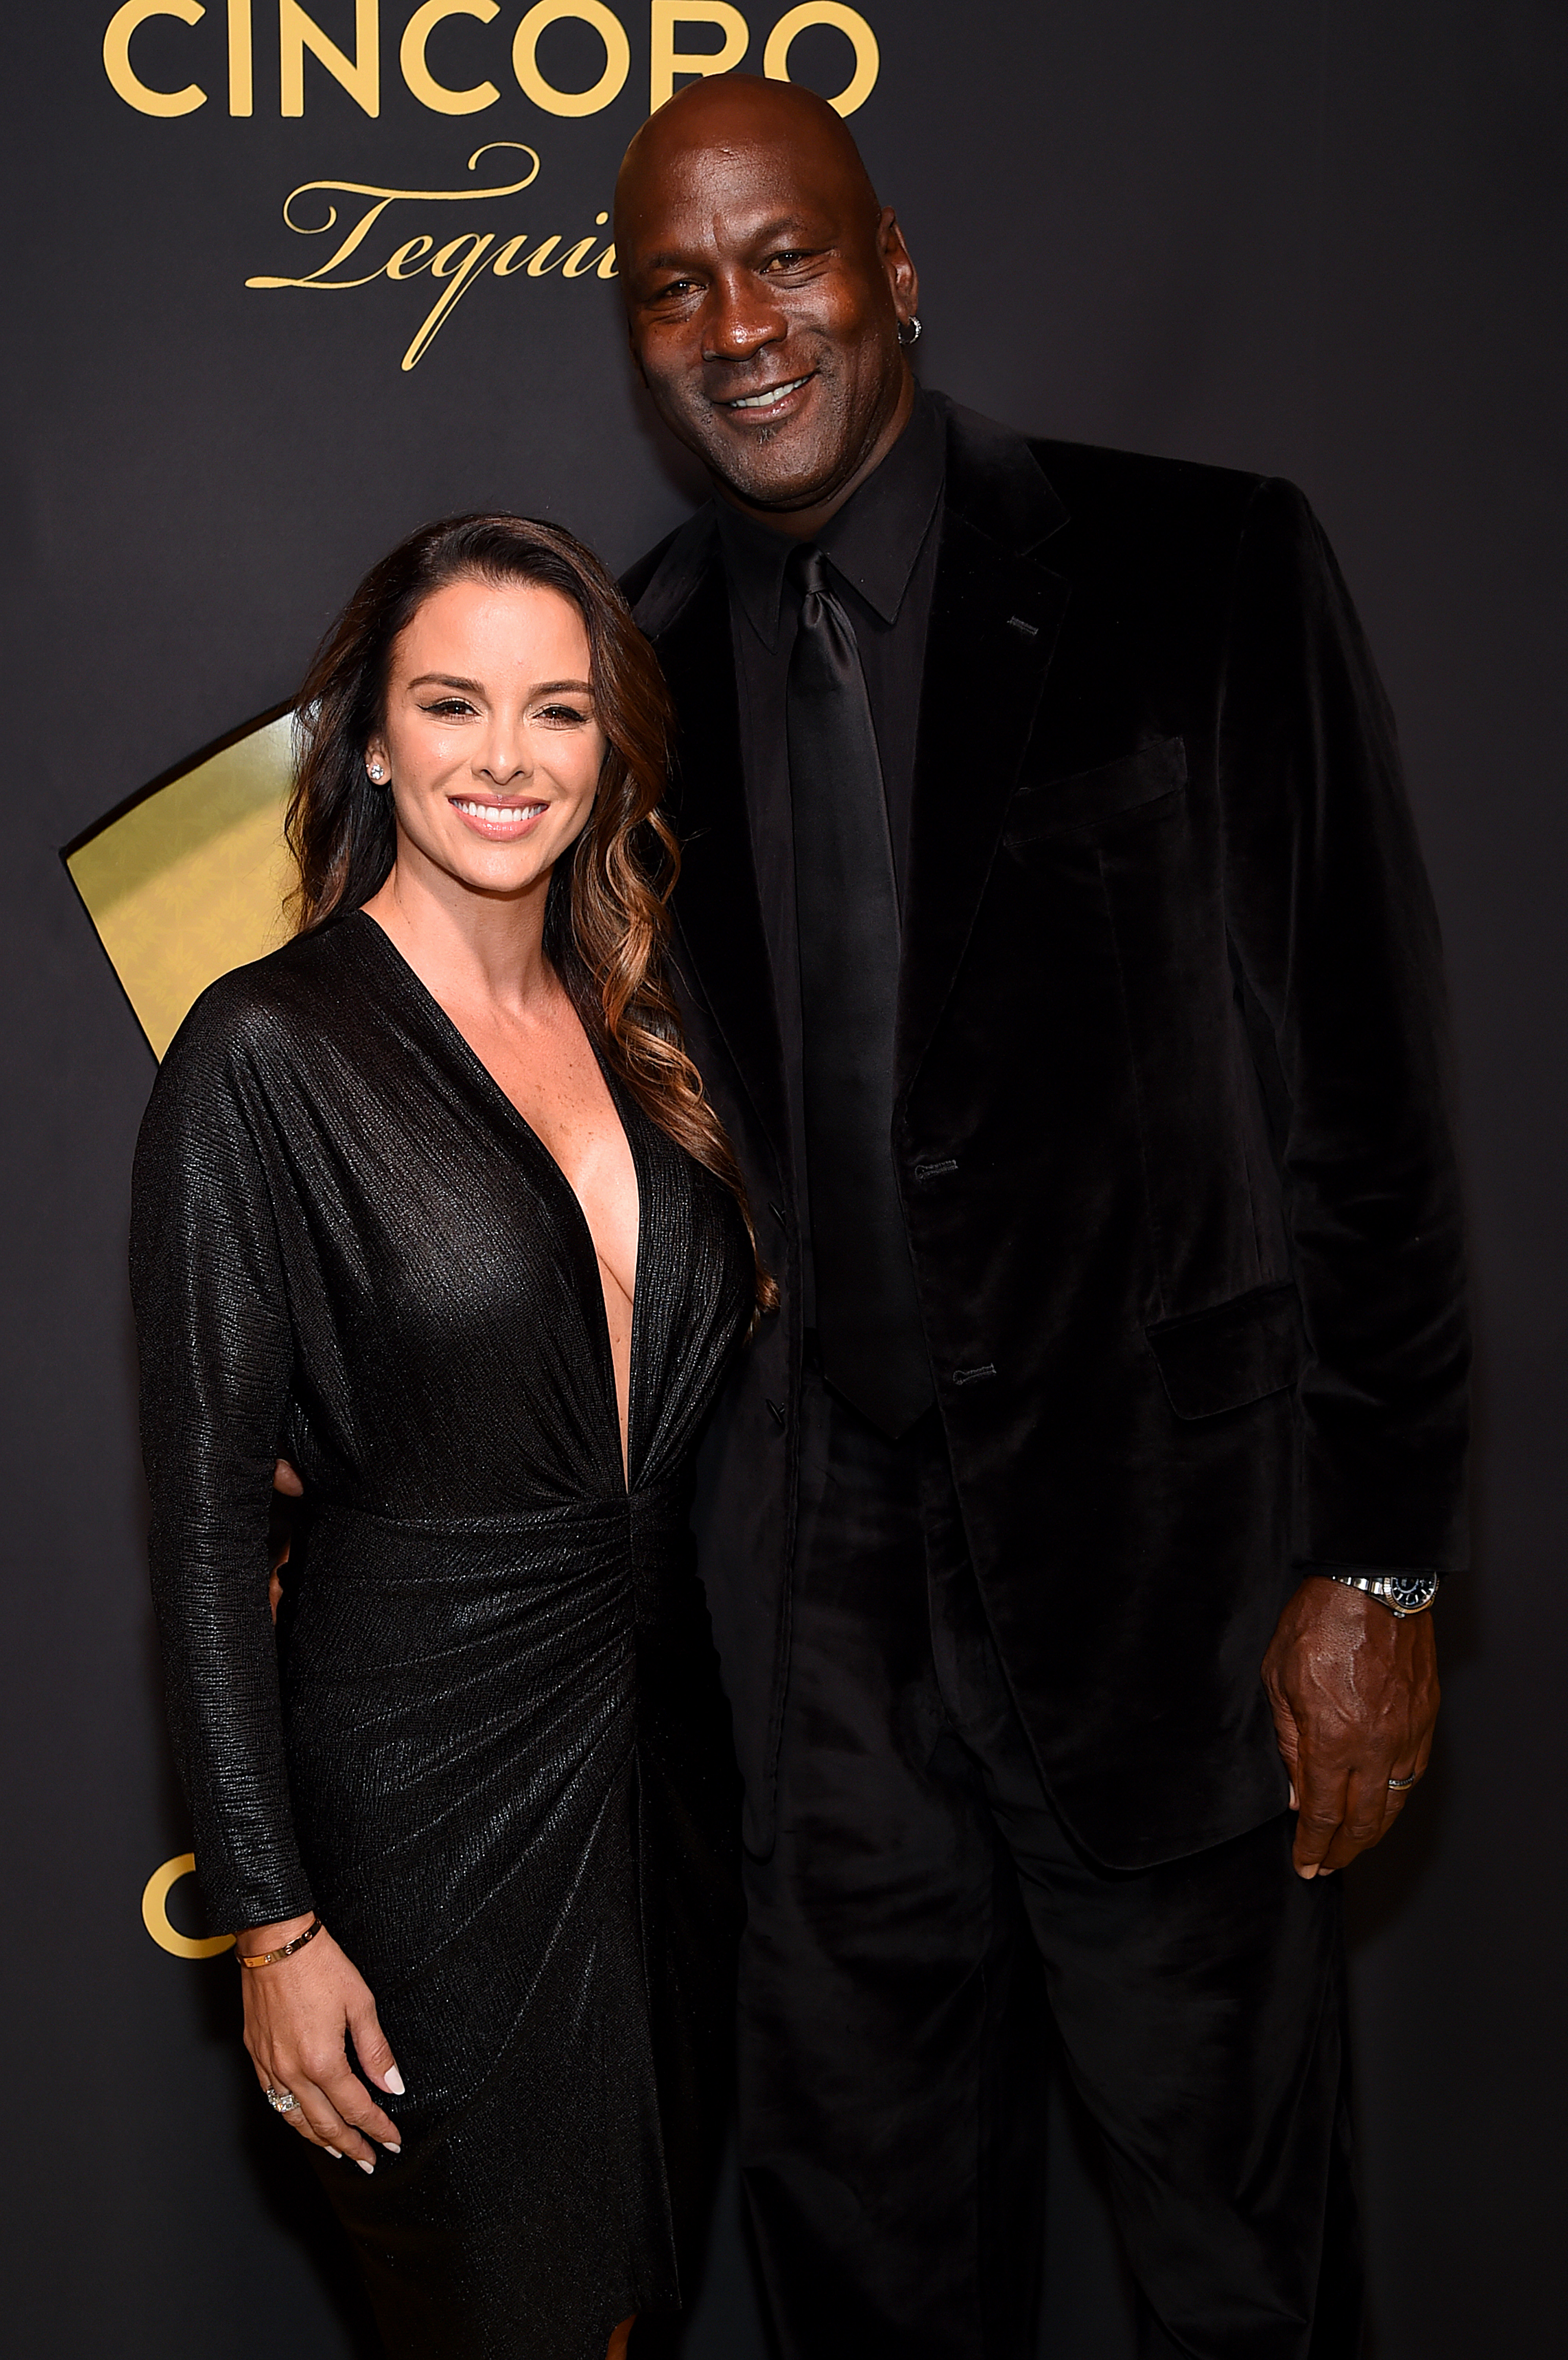 Yvette Prieto and Michael Jordan at the Cincoro Tequila launch on September 18, 2019, in New York City. | Source: Getty Images